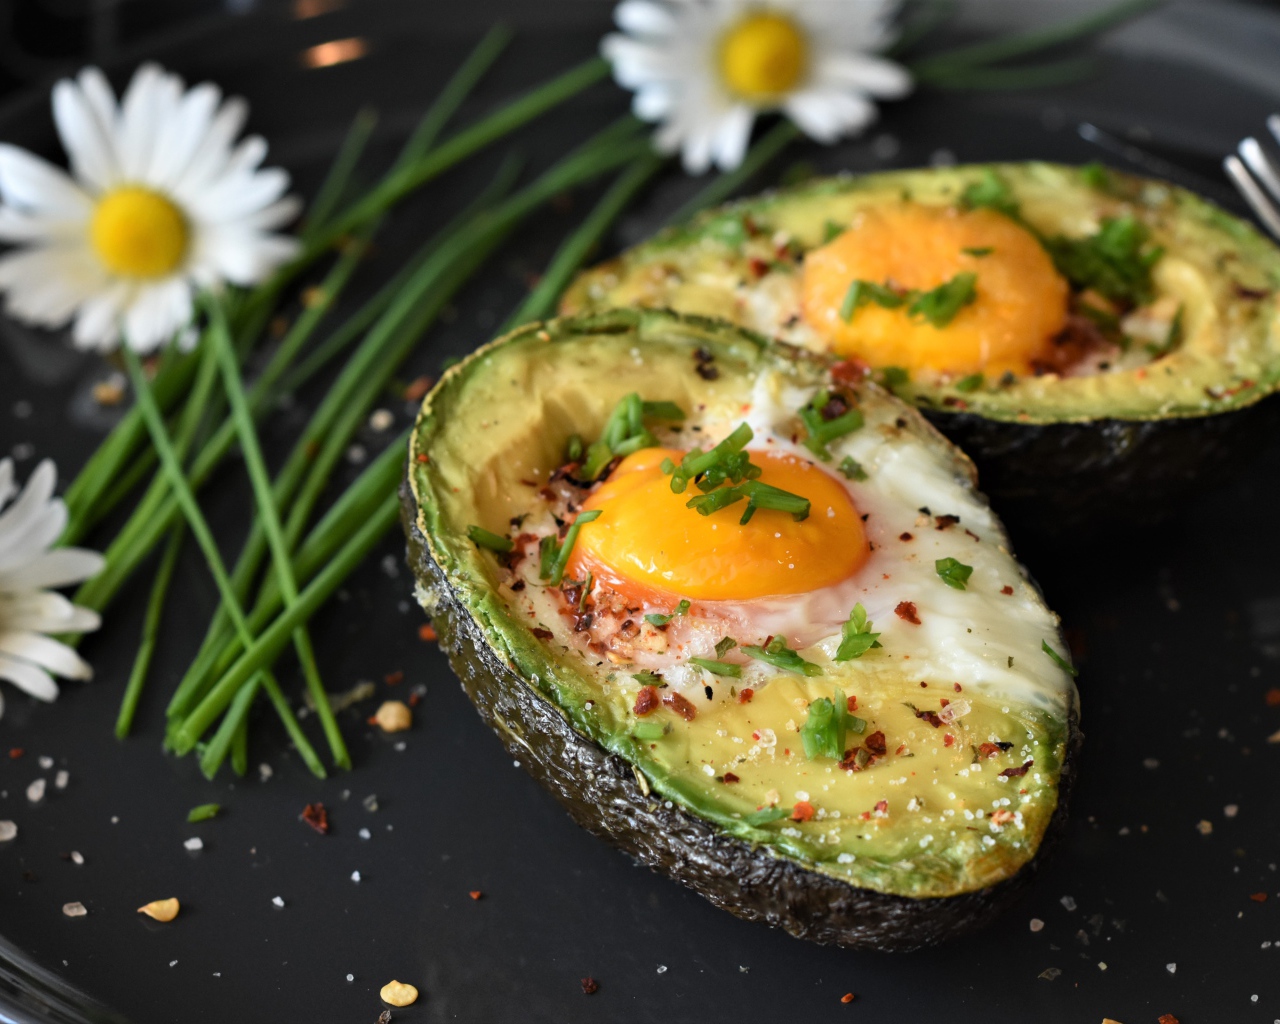 Baked avocado with scrambled eggs in a pan